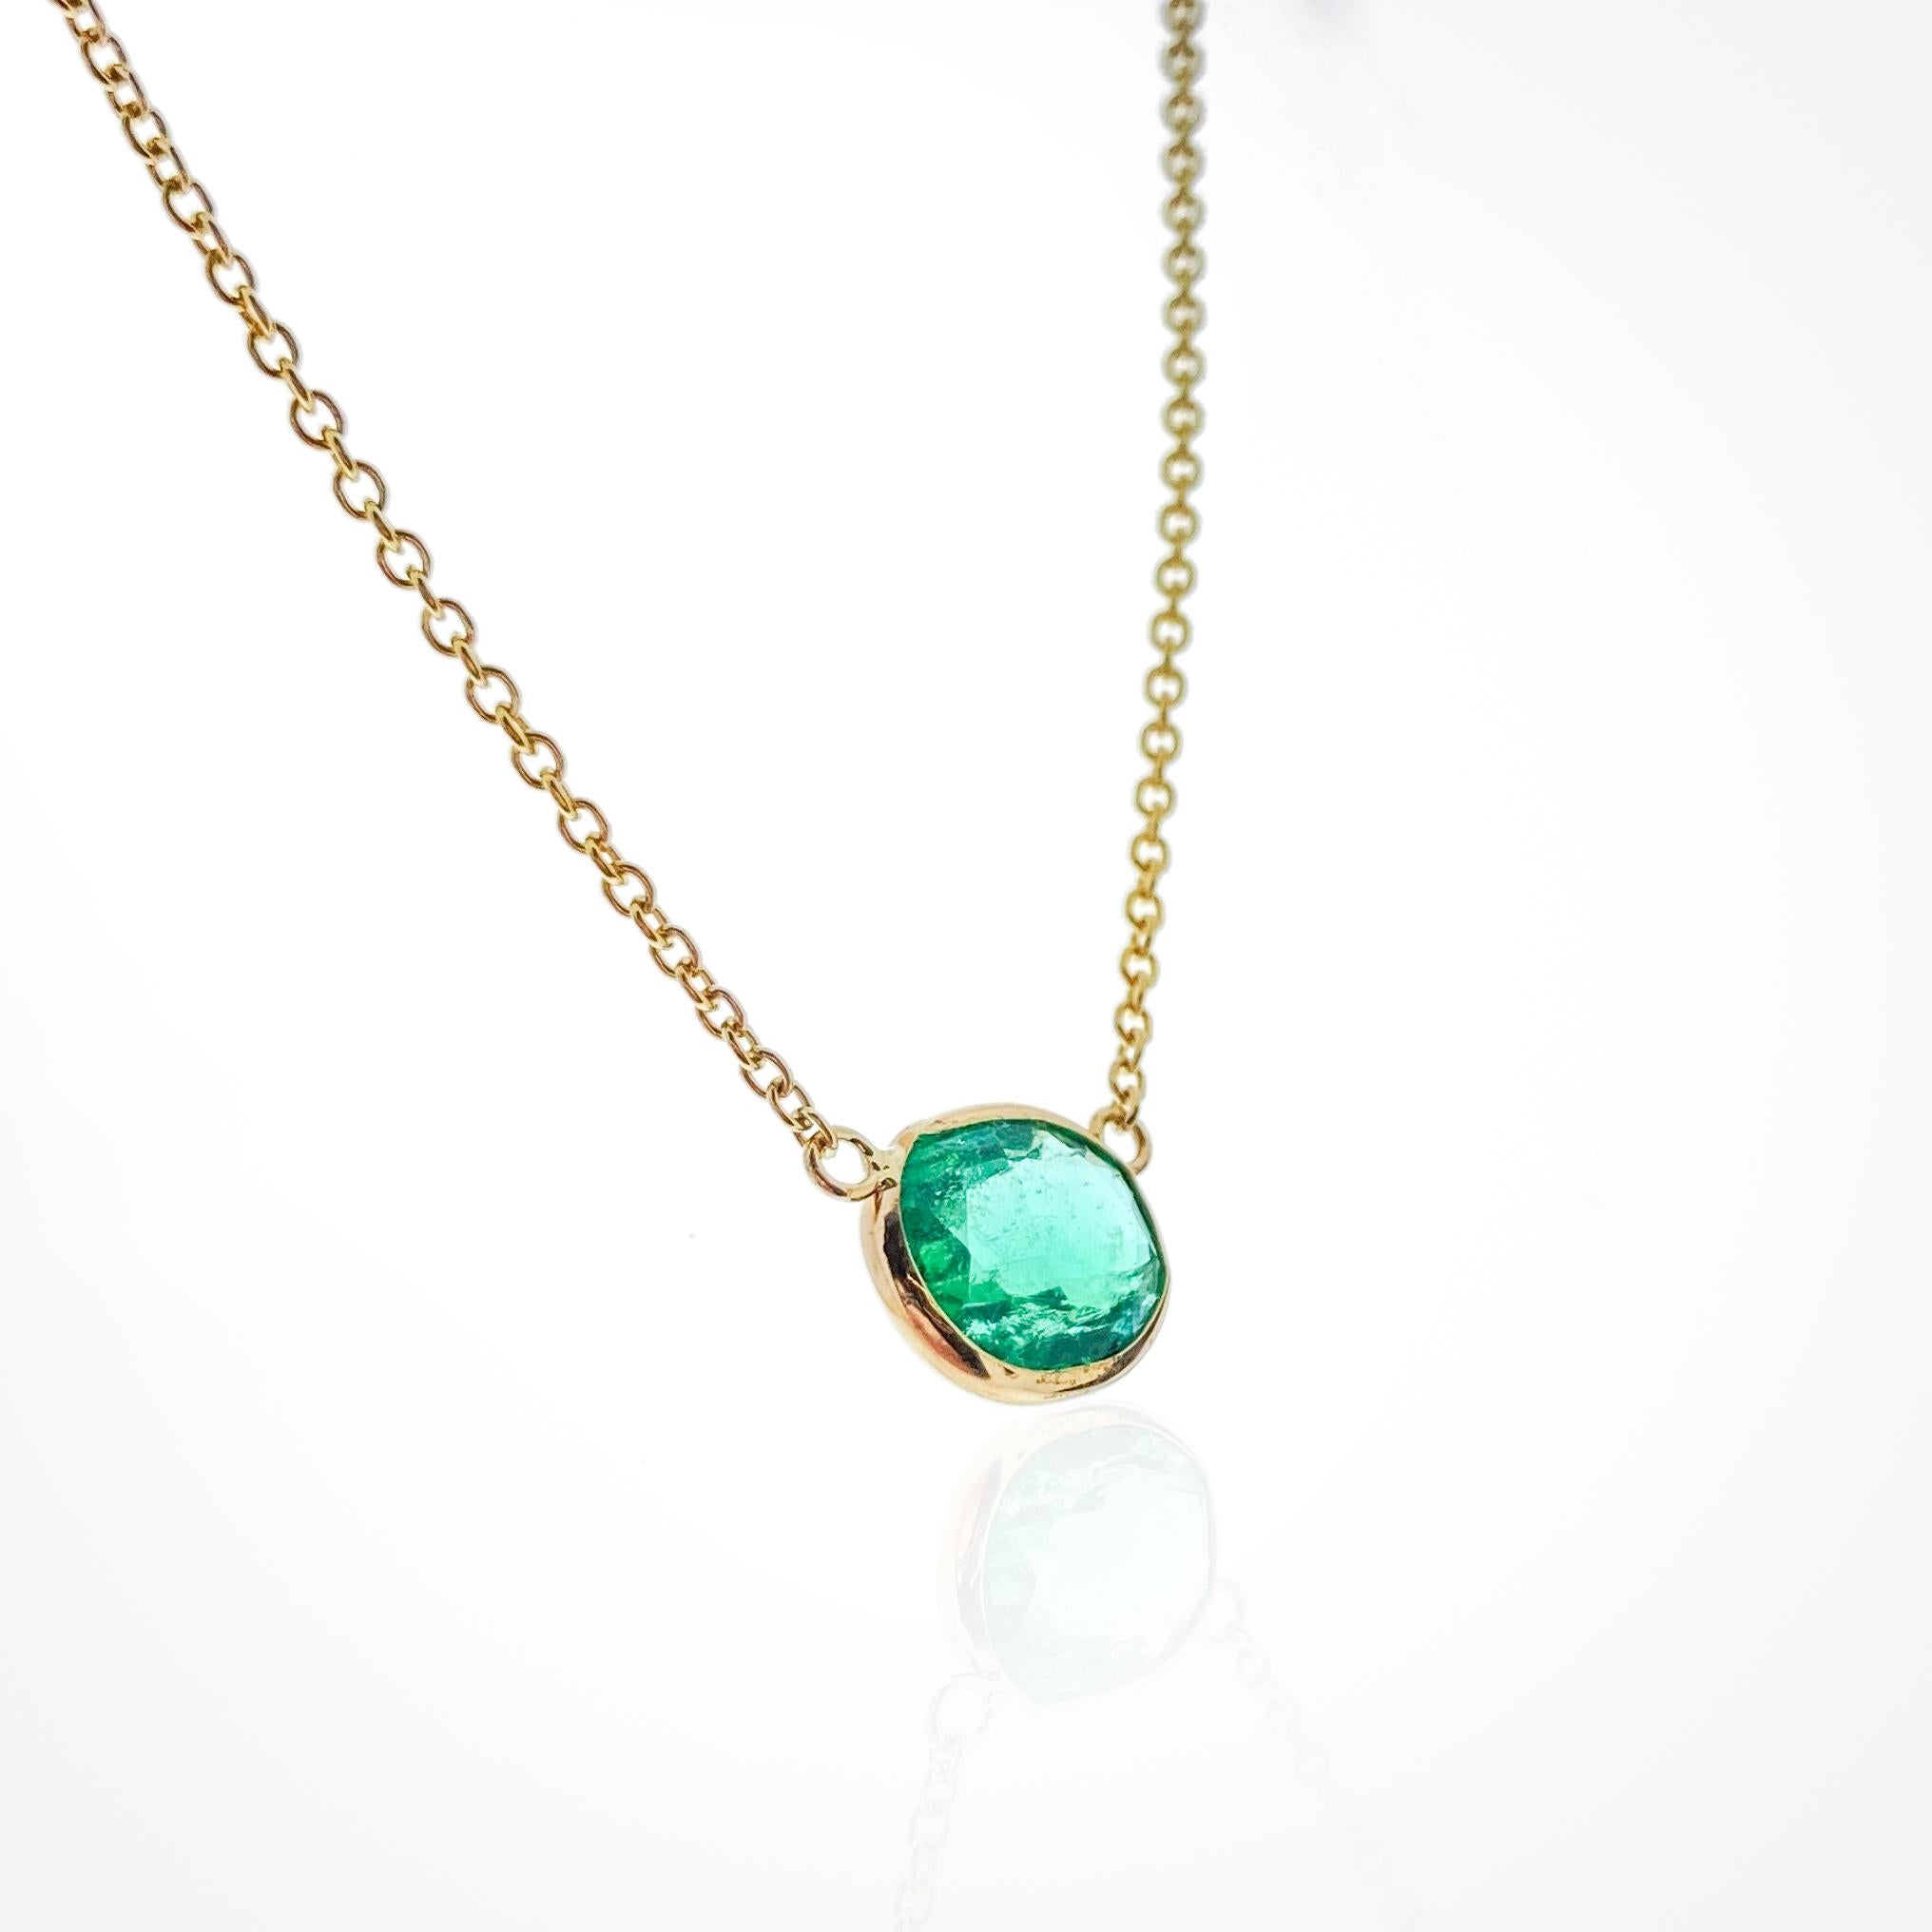 This necklace features an oval-cut green emerald with a weight of 1.67 carats, set in 14k yellow gold (YG). Emeralds are highly prized for their vibrant green color, and the oval cut is a classic choice for gemstones, offering an elegant and